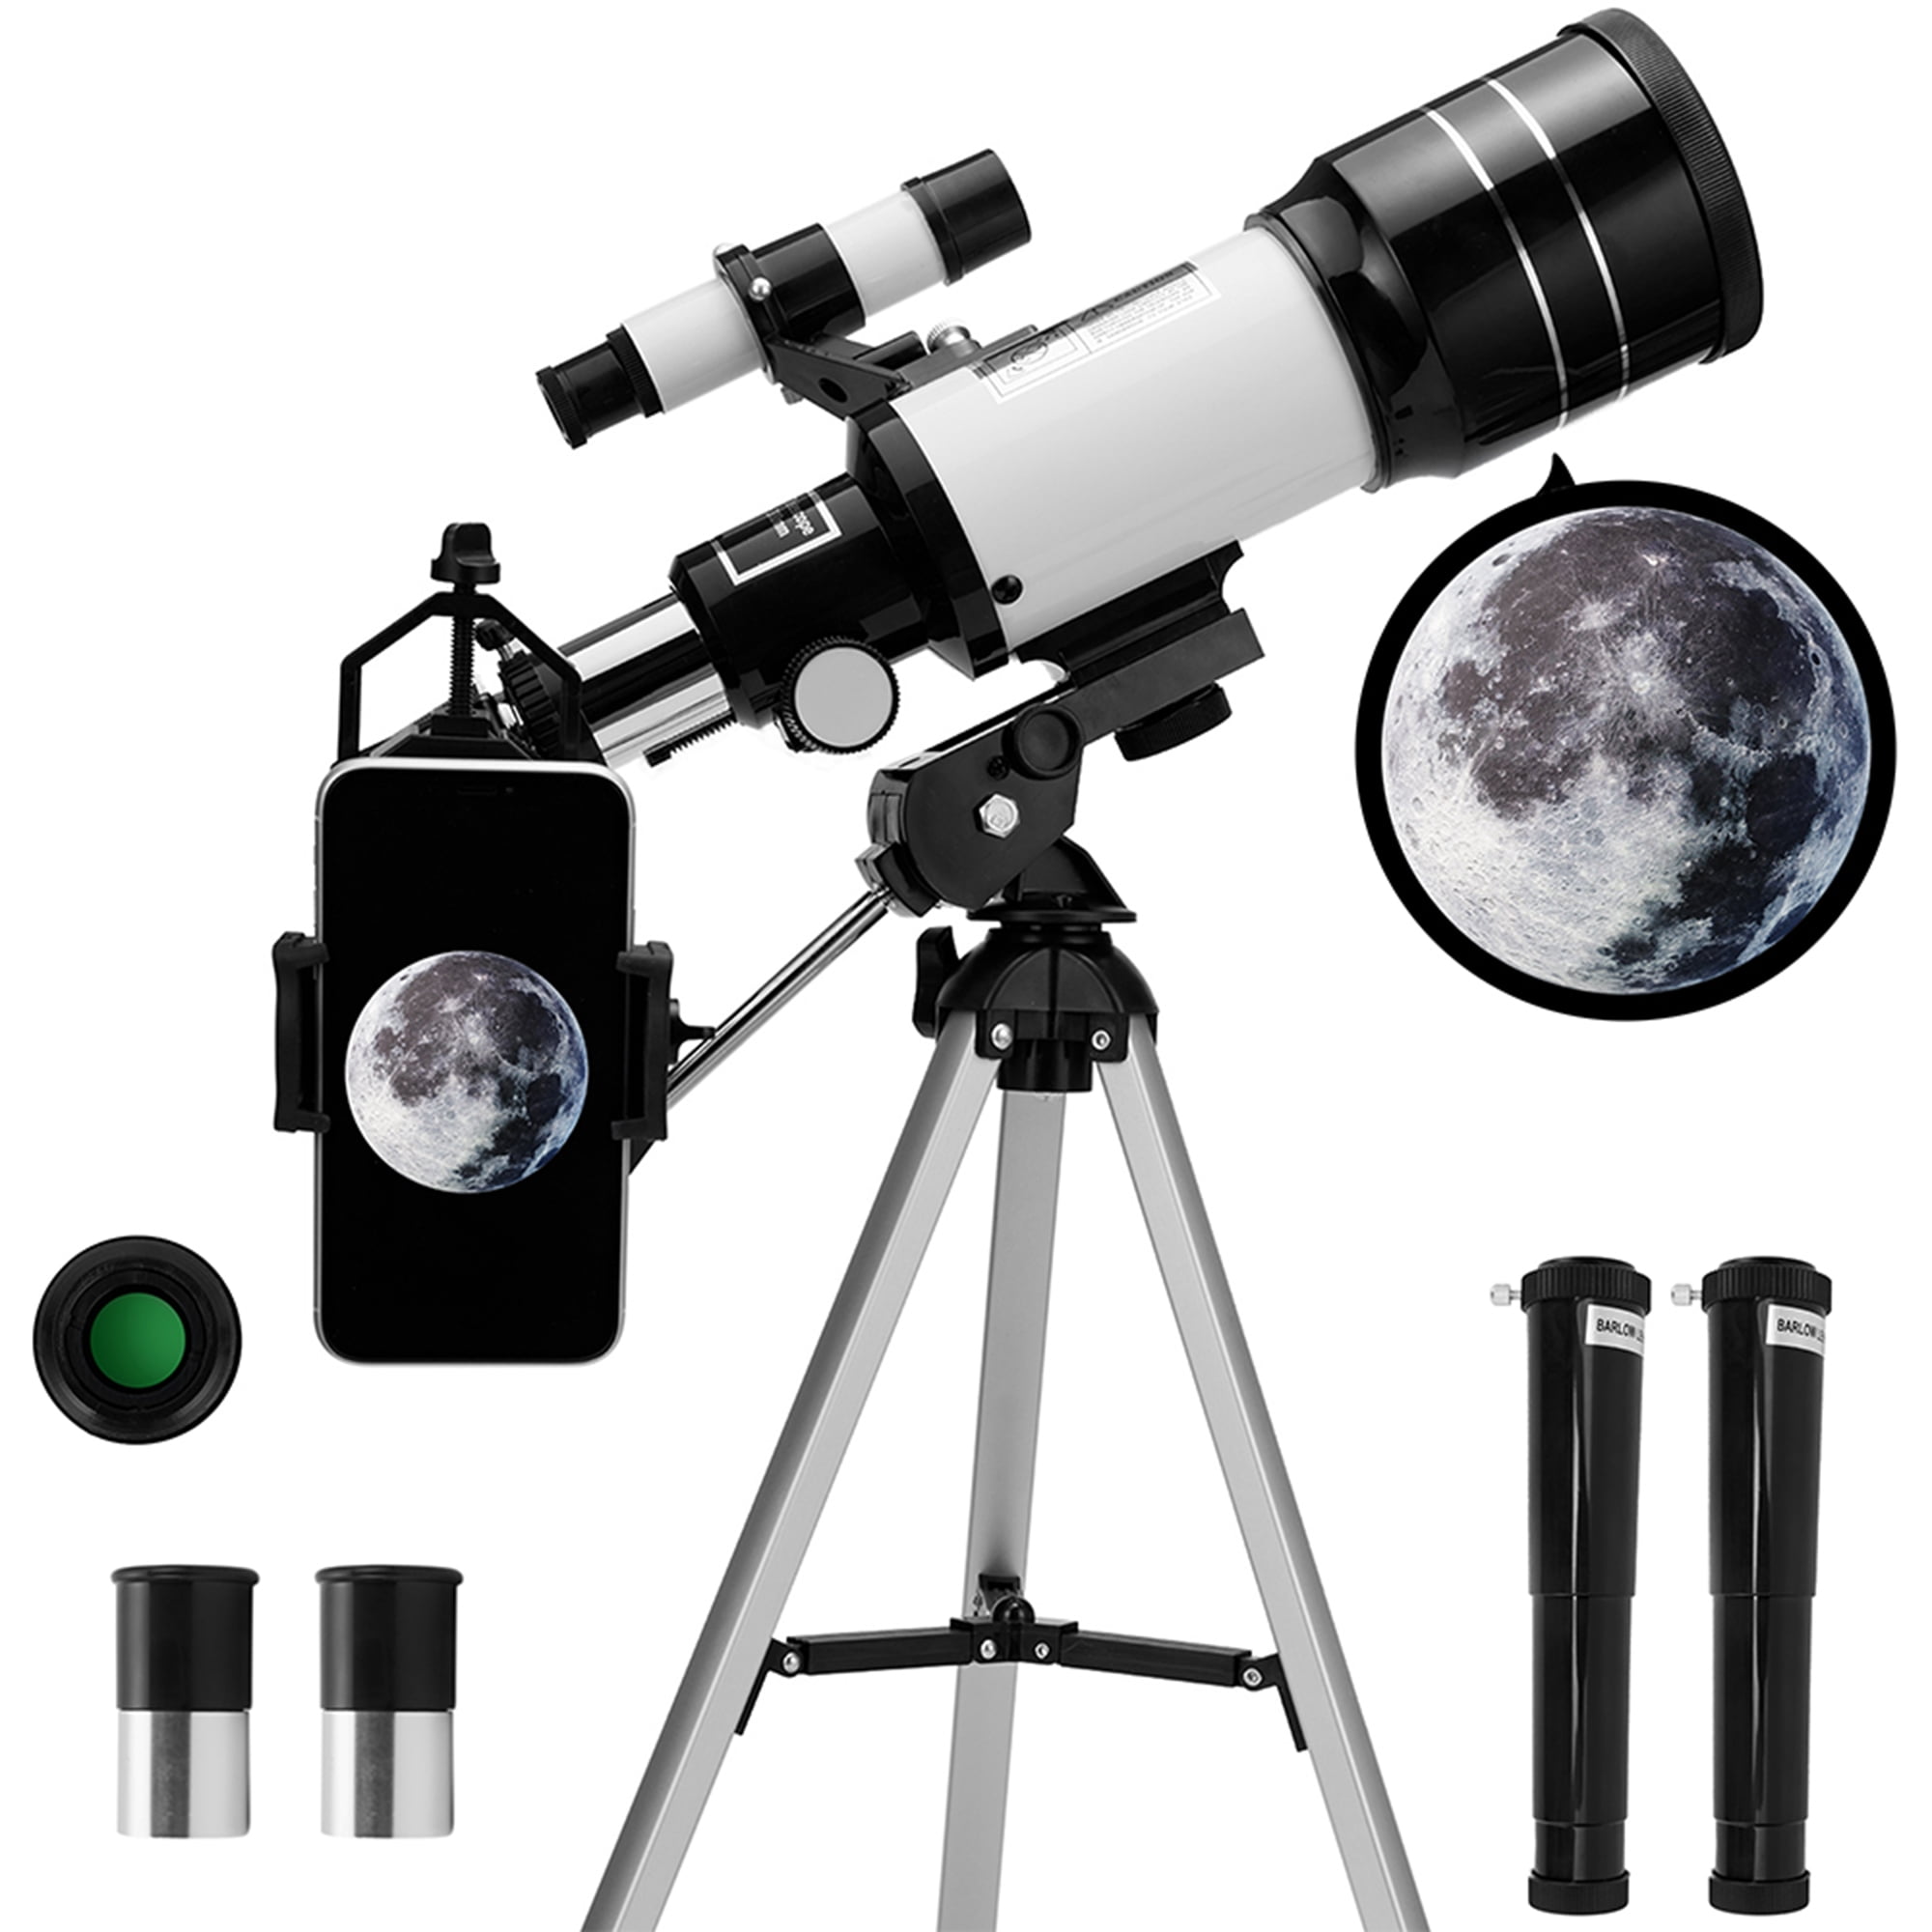 70mm Aperture Refractor Telescope for Astronomy Backpack Telescope for Kids Adults Astronomy Beginners with Tripod Smartphone Adapter Barlow Lens Two Eyepieces 